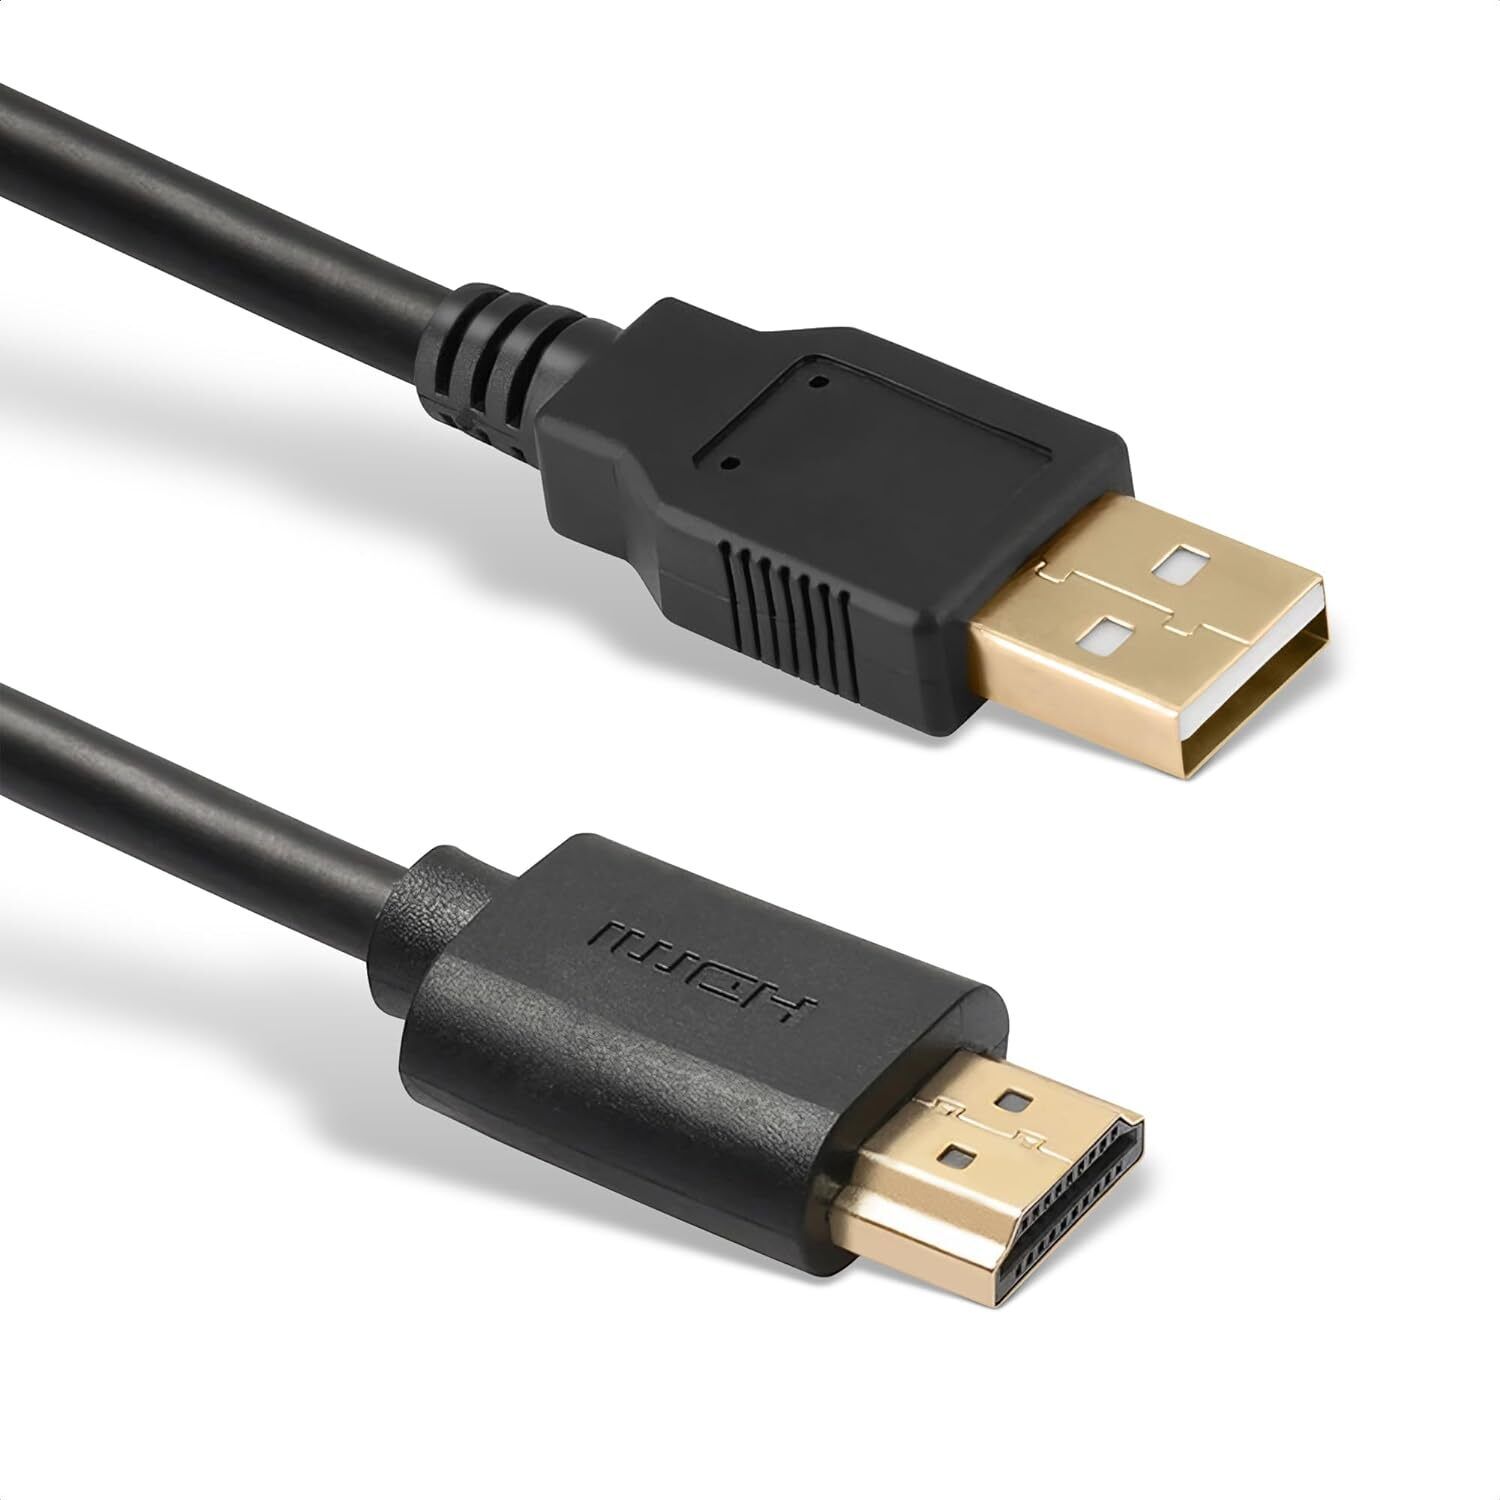 Usb to Hdmi Cable Usb 2.0 Cable - 0.5M/1.64Ft Charger Cable Splitter Hdmi to Usb